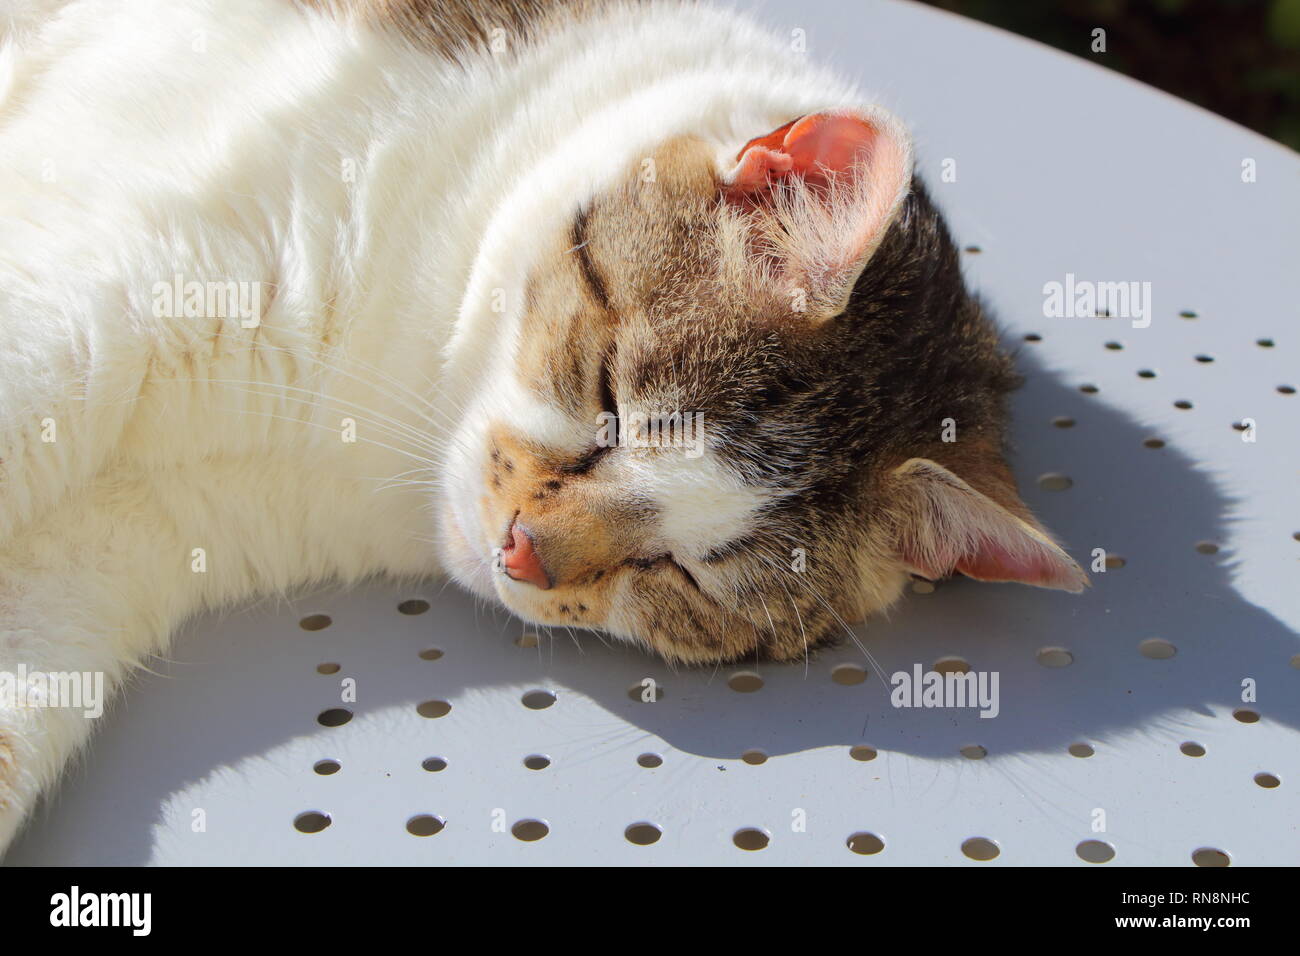 Close-up of a tabby cat sleeping on a table in a garden Stock Photo